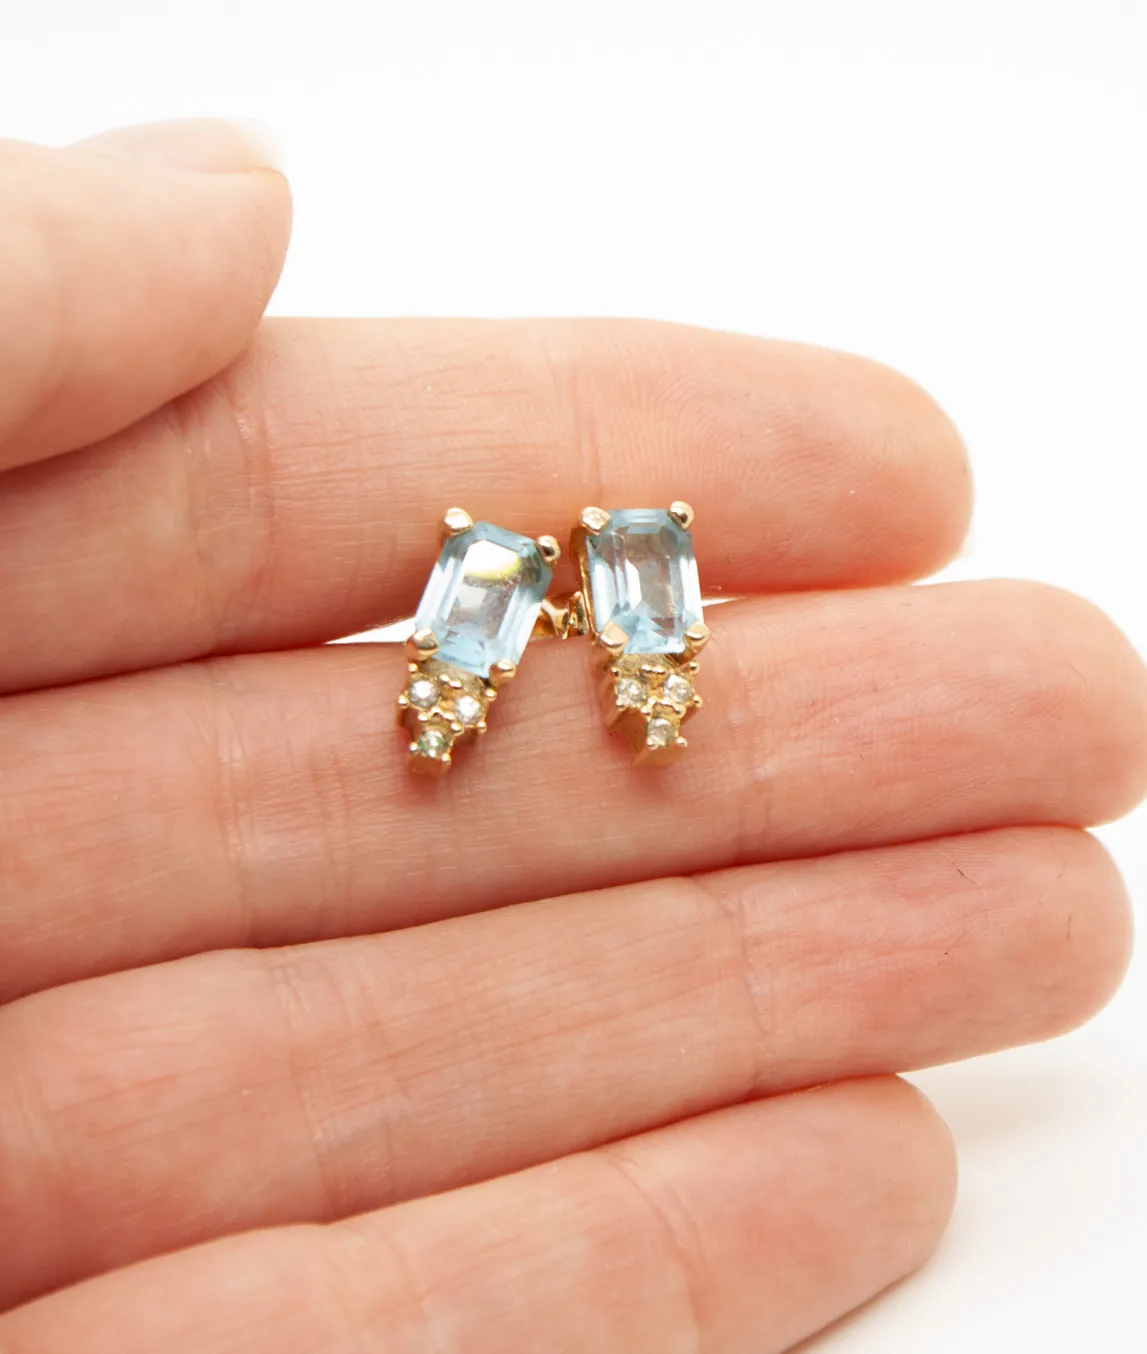 Small blue clip on earrings by Dior